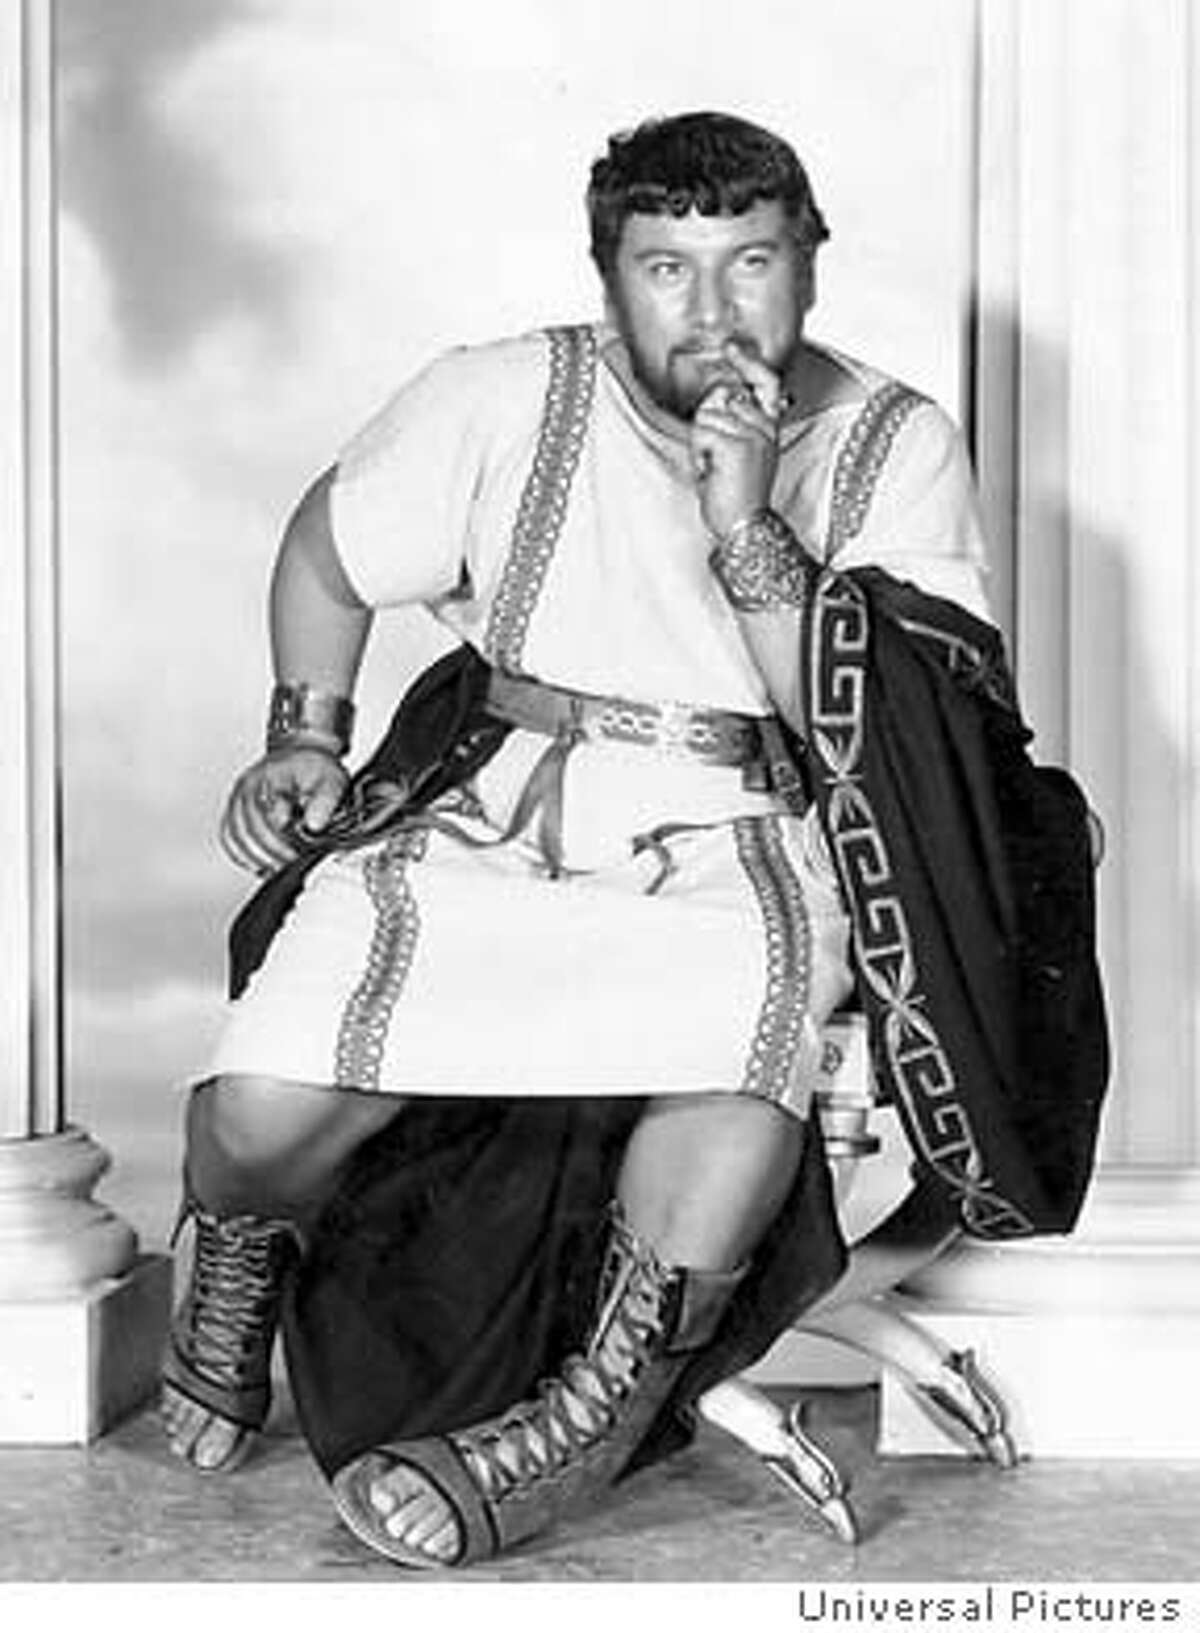 (NYT15) UNDATED -- March 29, 2004 -- OBIT-USTINOV-B&W -- Peter Ustinov, the hair-trigger wit with the avuncular charm whose 60-year-career amounted to a revovling series of star turns as actor, playwright, novelist, director and raconteur, died Sunday at a clinic near his home in Bursins, Switzerland. He was 82. Ustinov as Lentulus Batiatus in the 1960 film "Spartacus." Ustinov won an Oscar for best supporting actor in the film. (Universal Pictures/The New York Times)